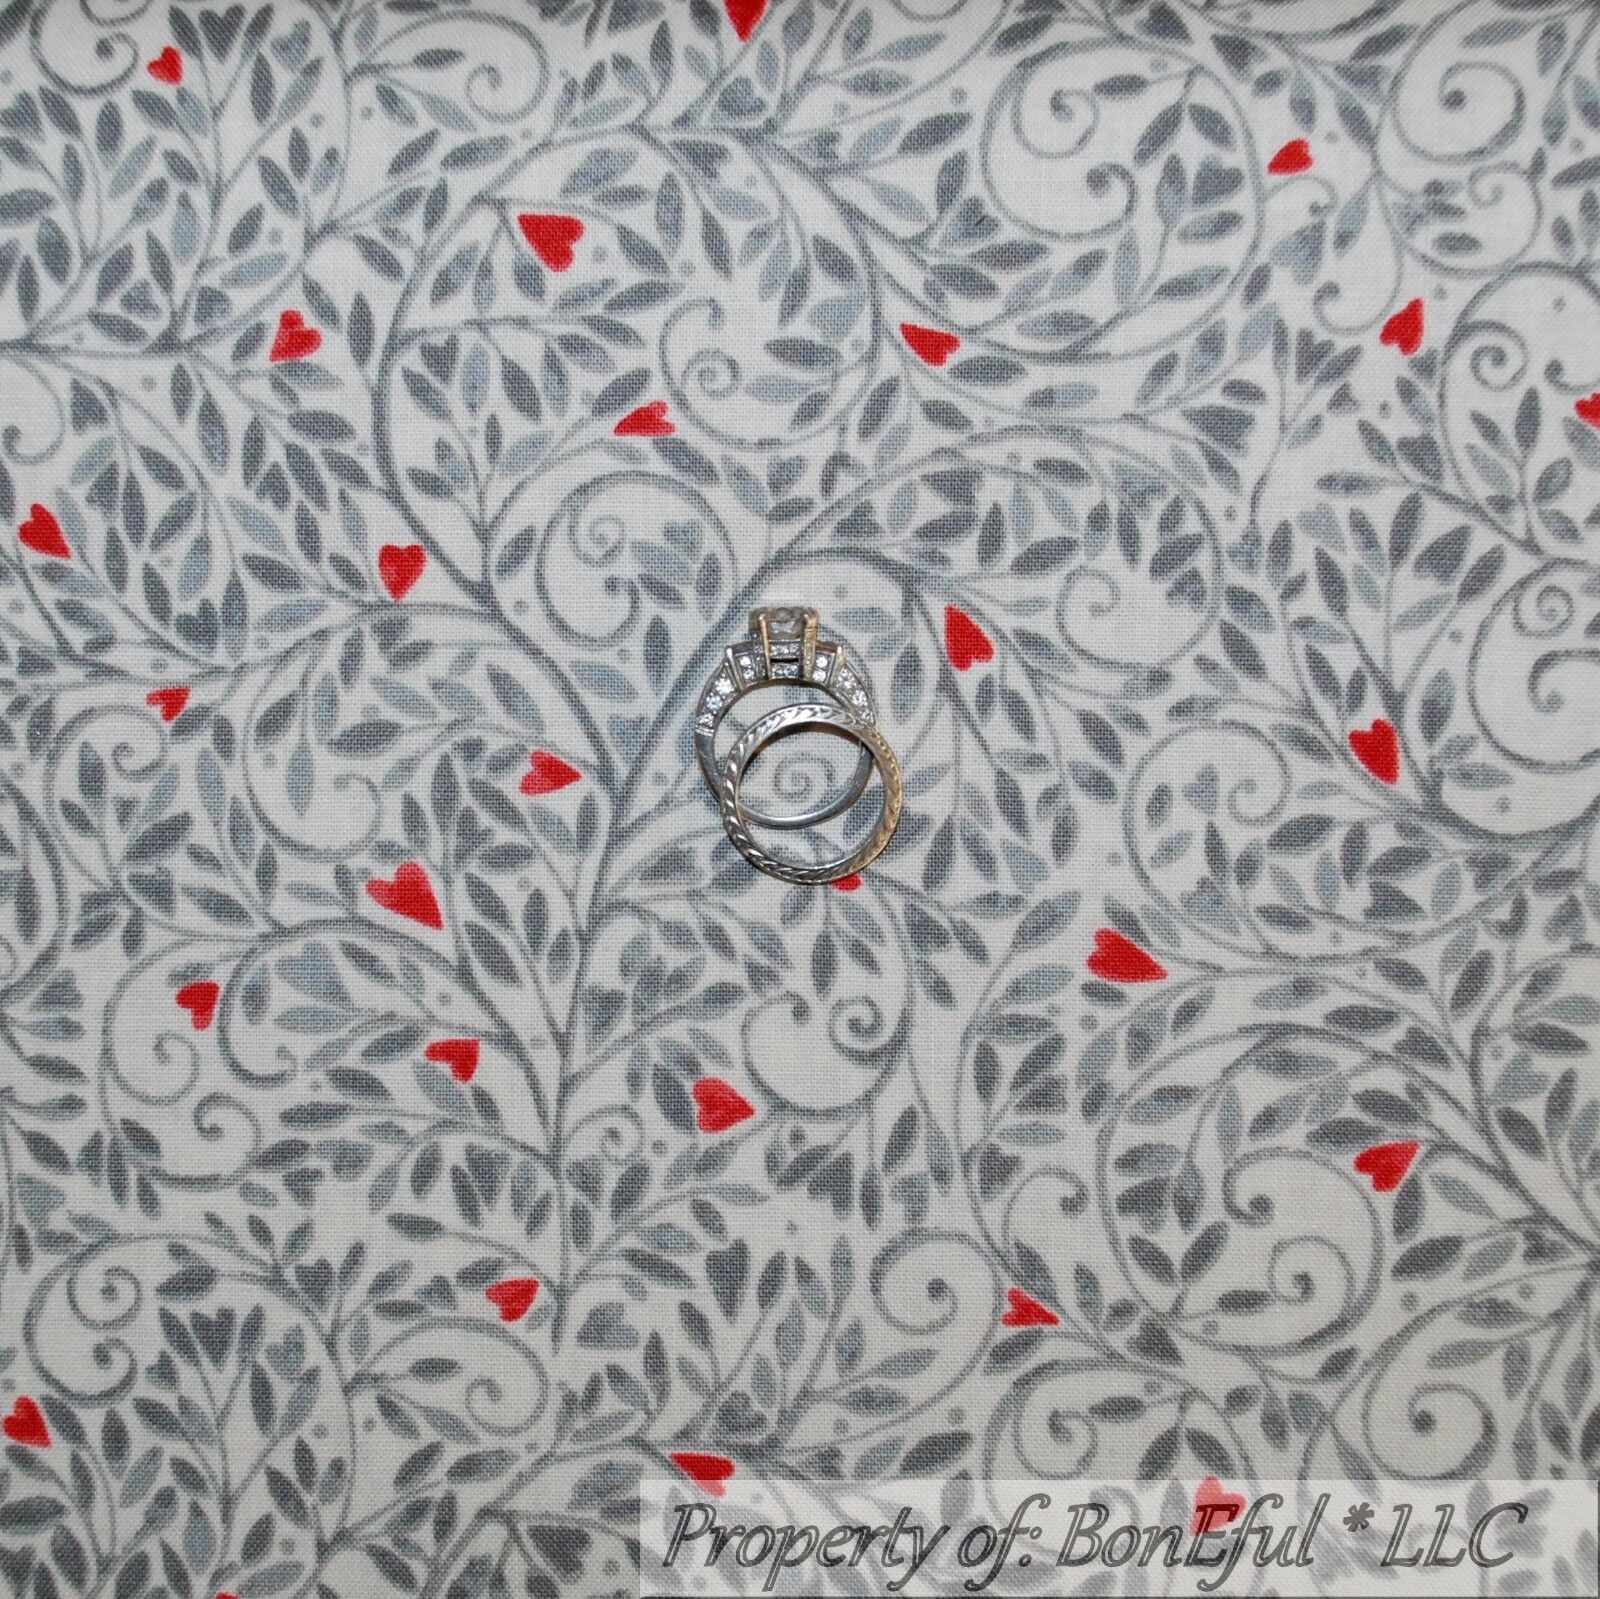 BonEful FABRIC Cotton Quilt Cream Gray Leaf Swirl Red Heart French Country SCRAP